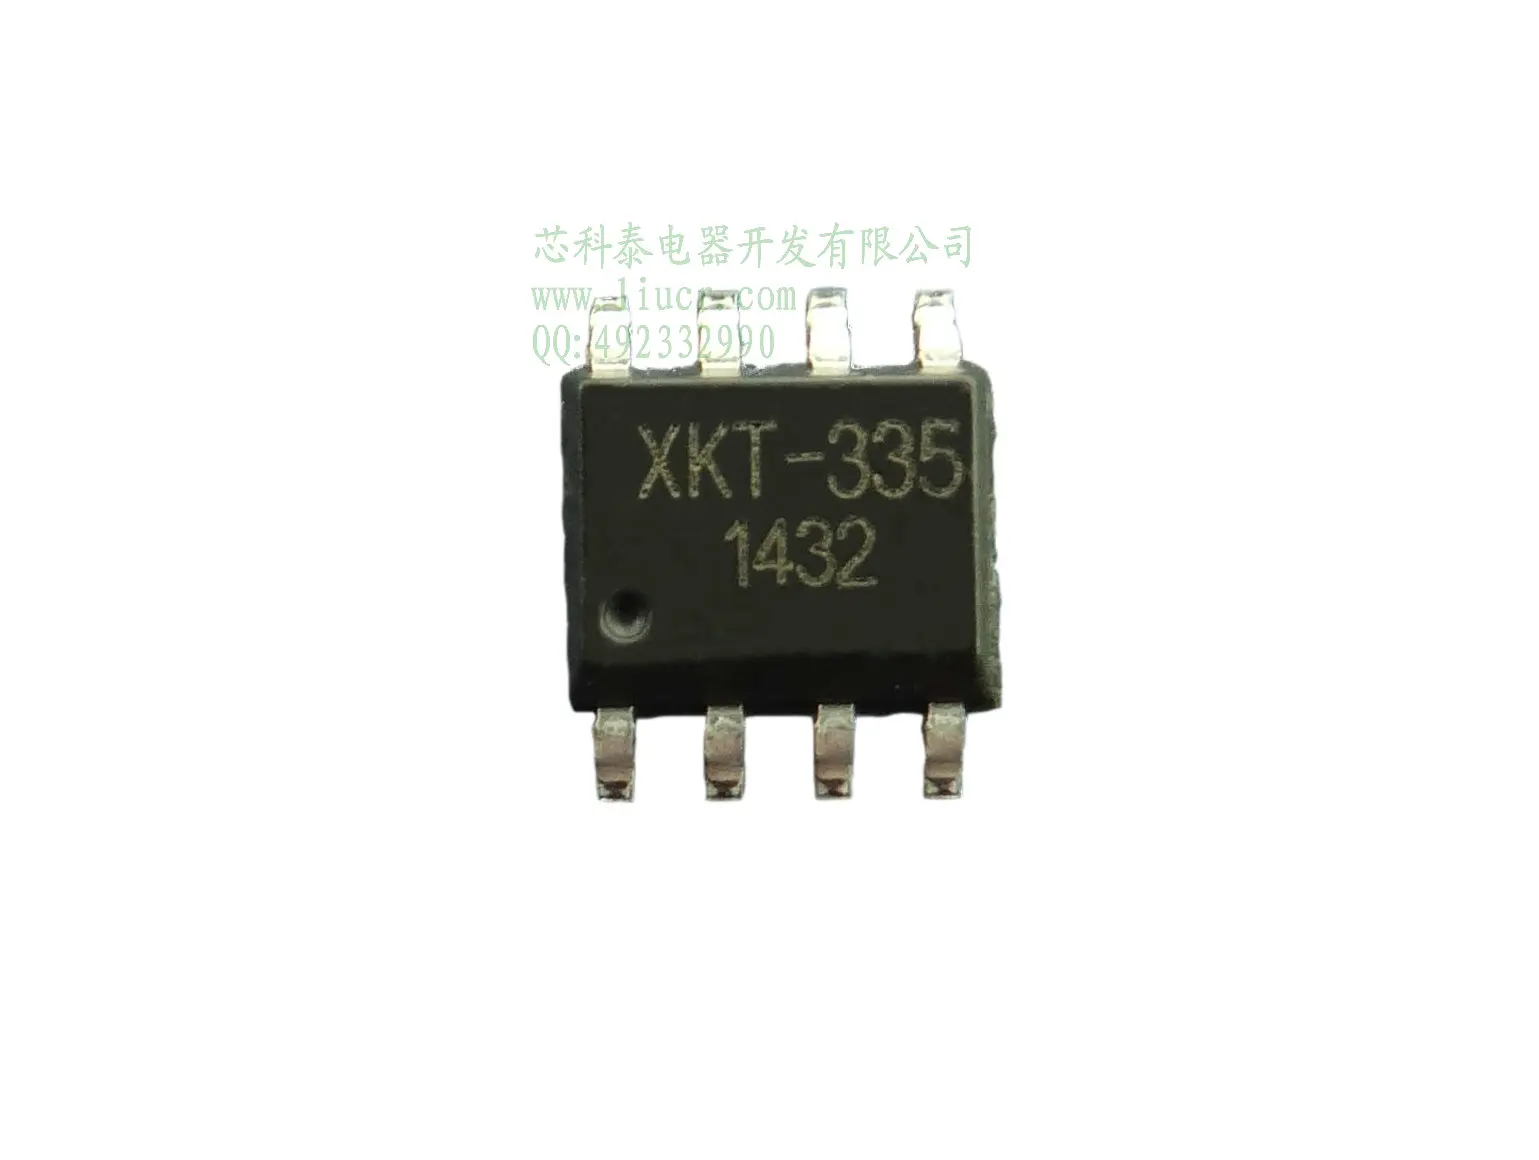 XKT-335 high current low price wireless  supply wireless charging  chip IC